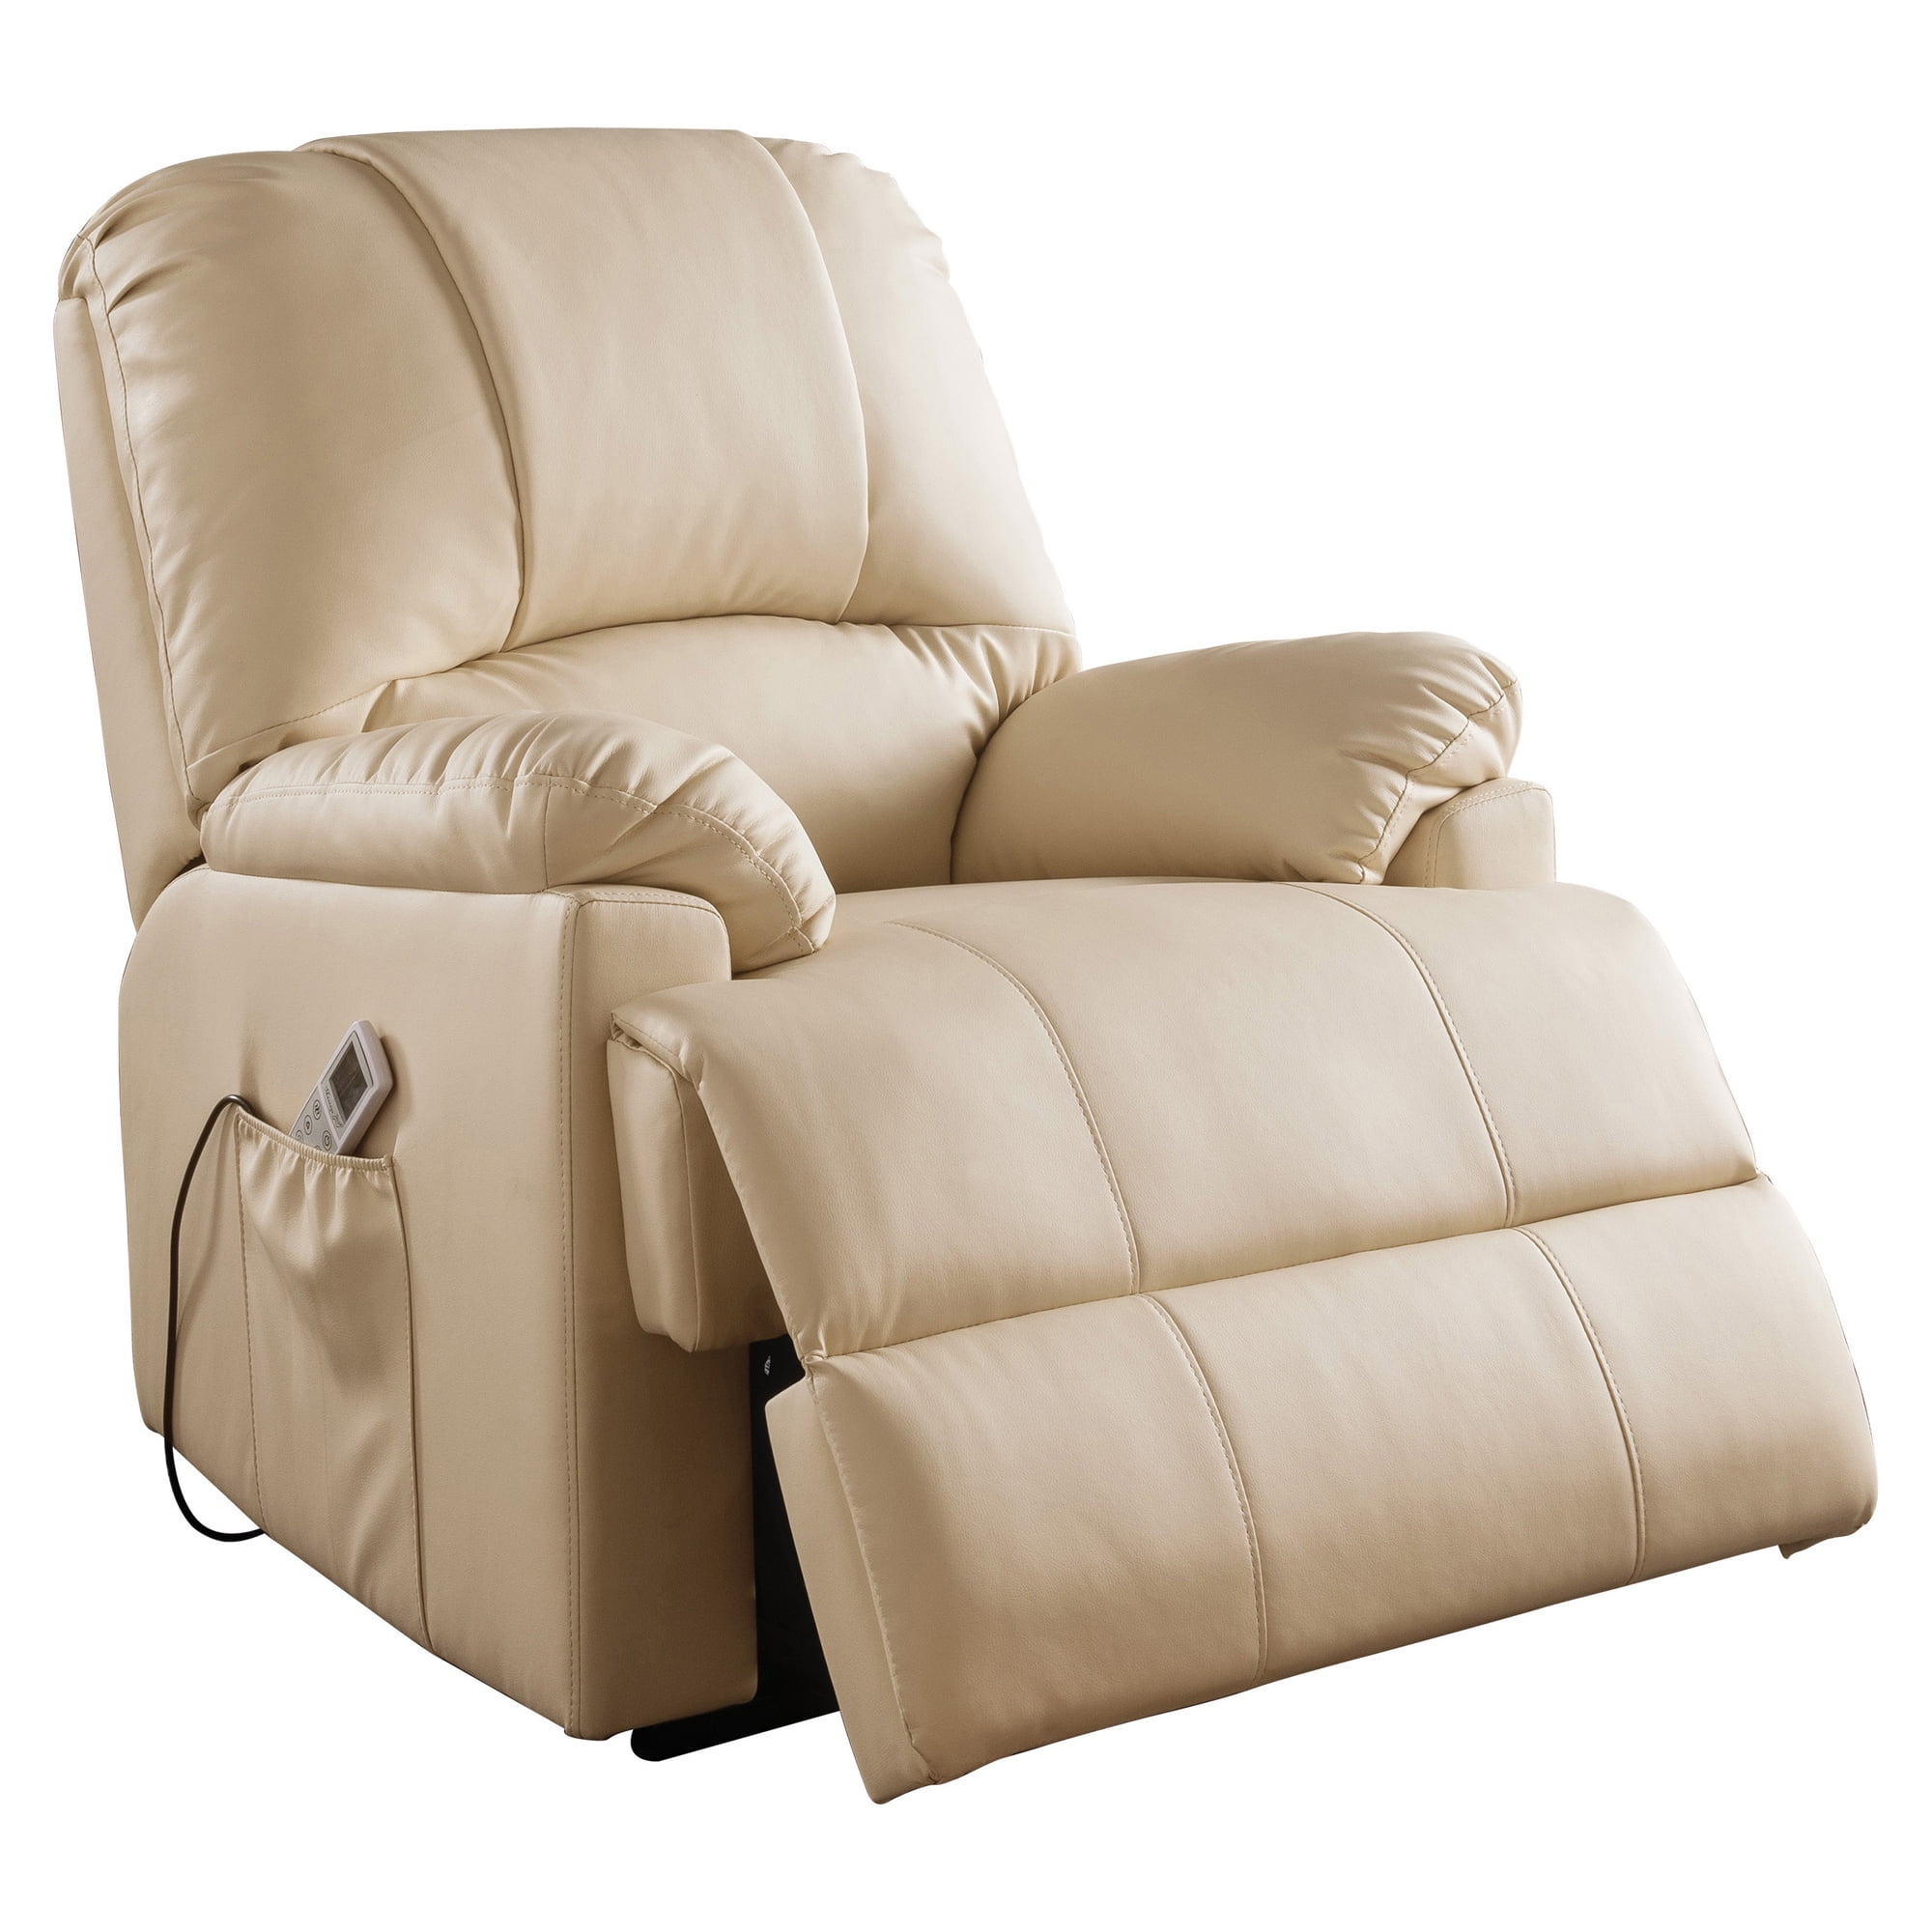 Picture of ACME 59286 Ixora Recliner with Power Lift & Massage - Beige PU - 41 x 34 x 37 in.